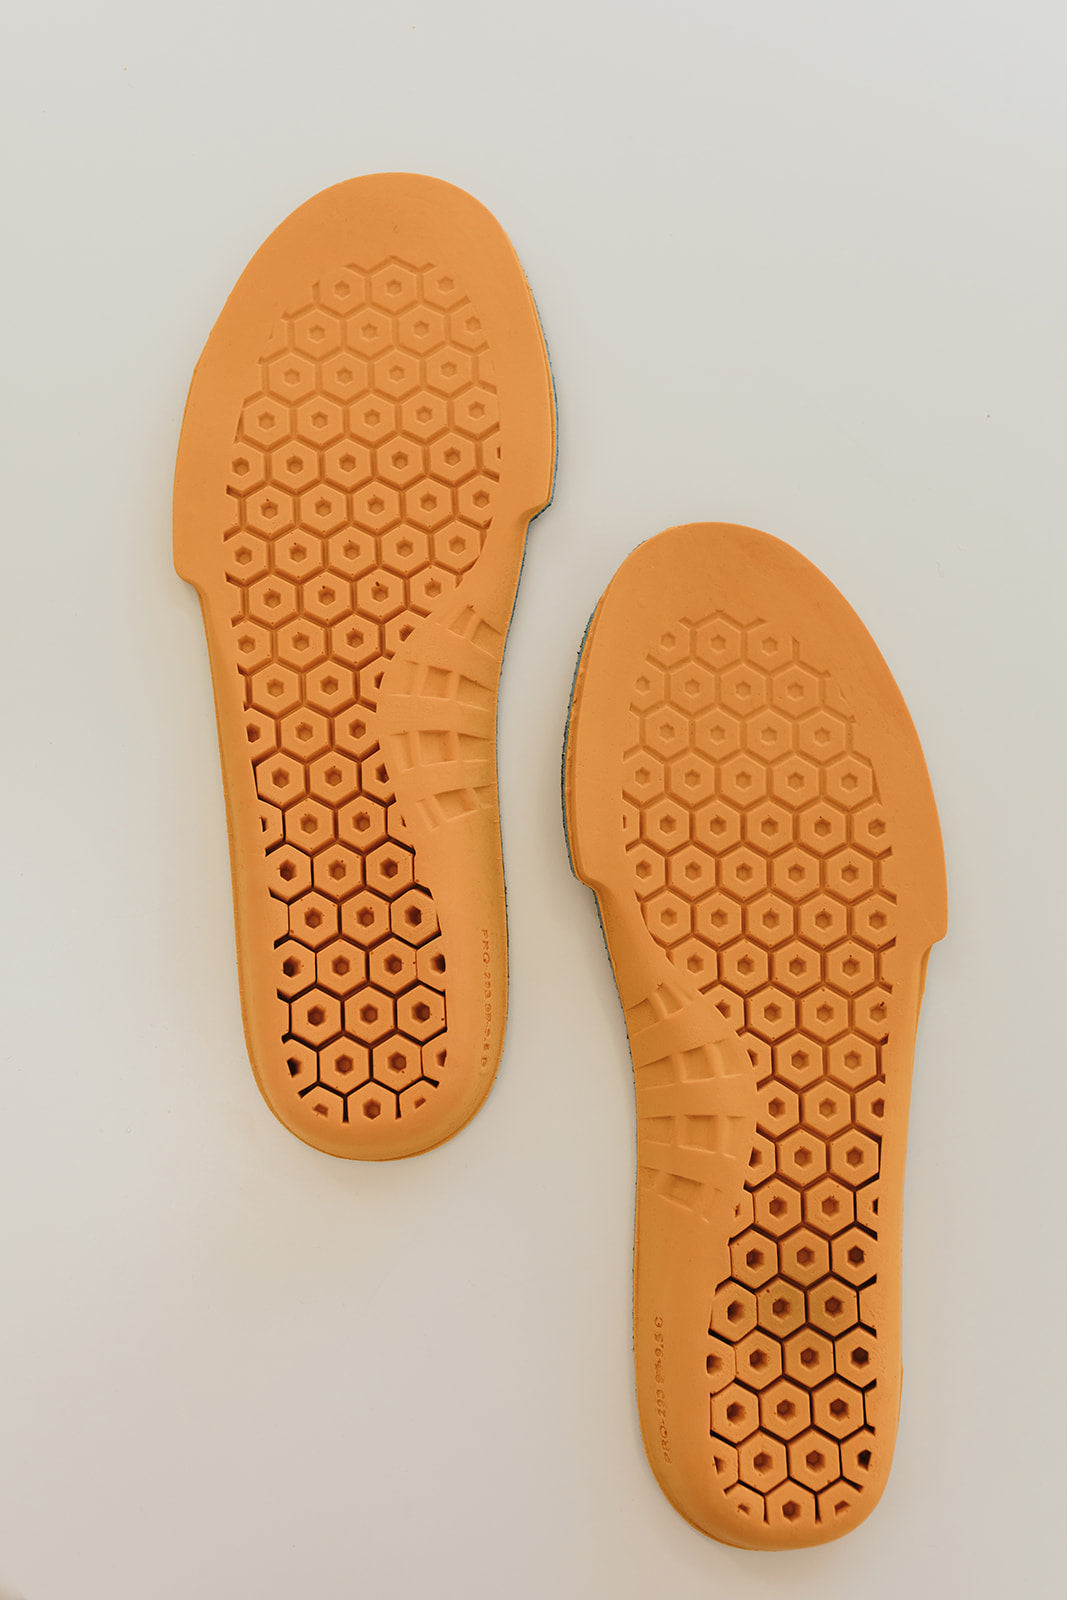 Accessories - Timberland Pro Anti-Fatigue Technology Insoles